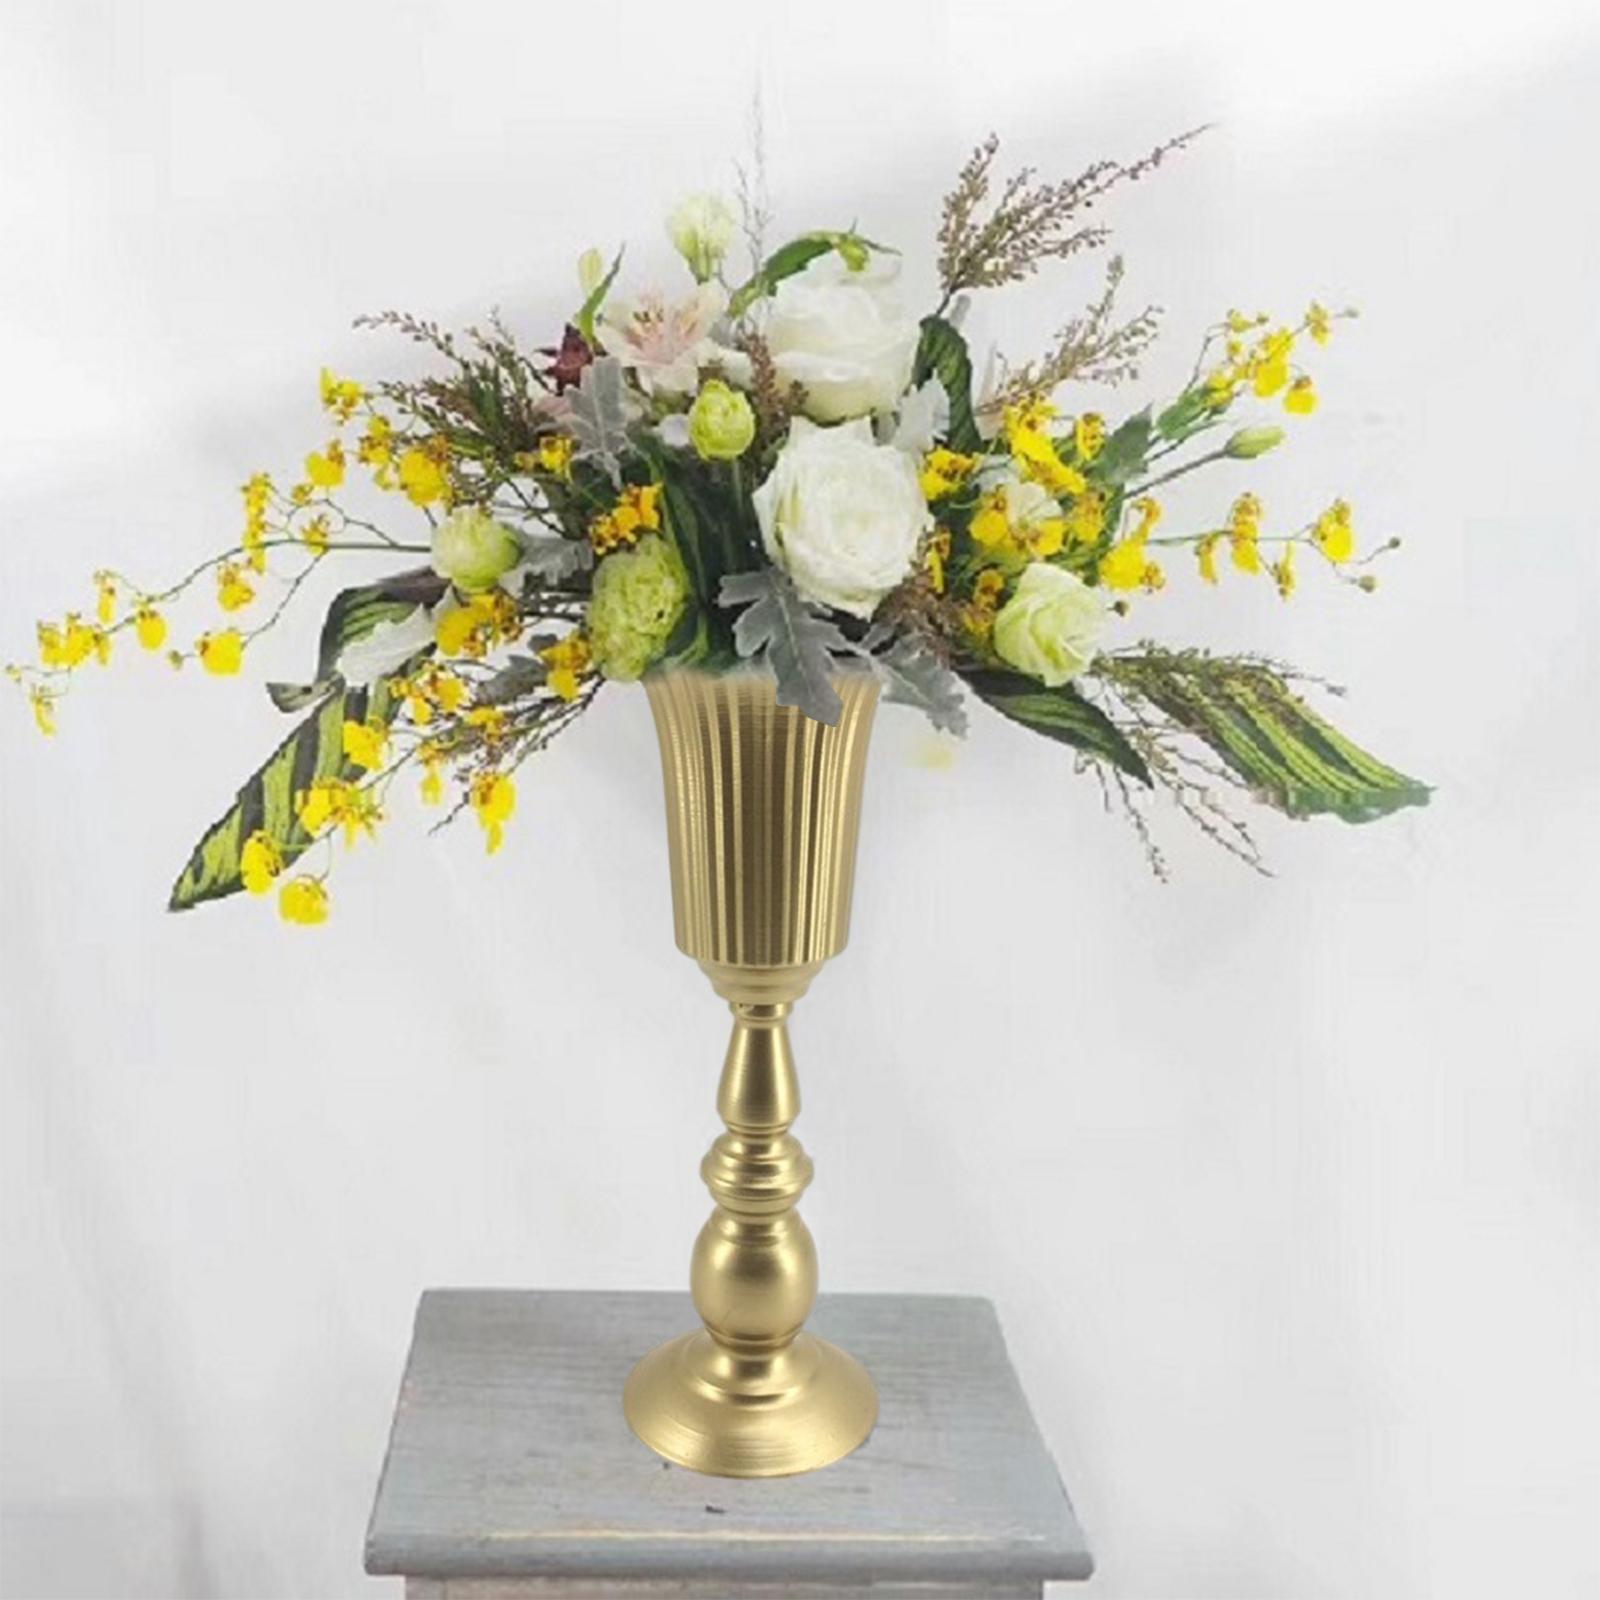 Metal Flowers Vase Holder Pot Table Centerpieces for Wedding Party